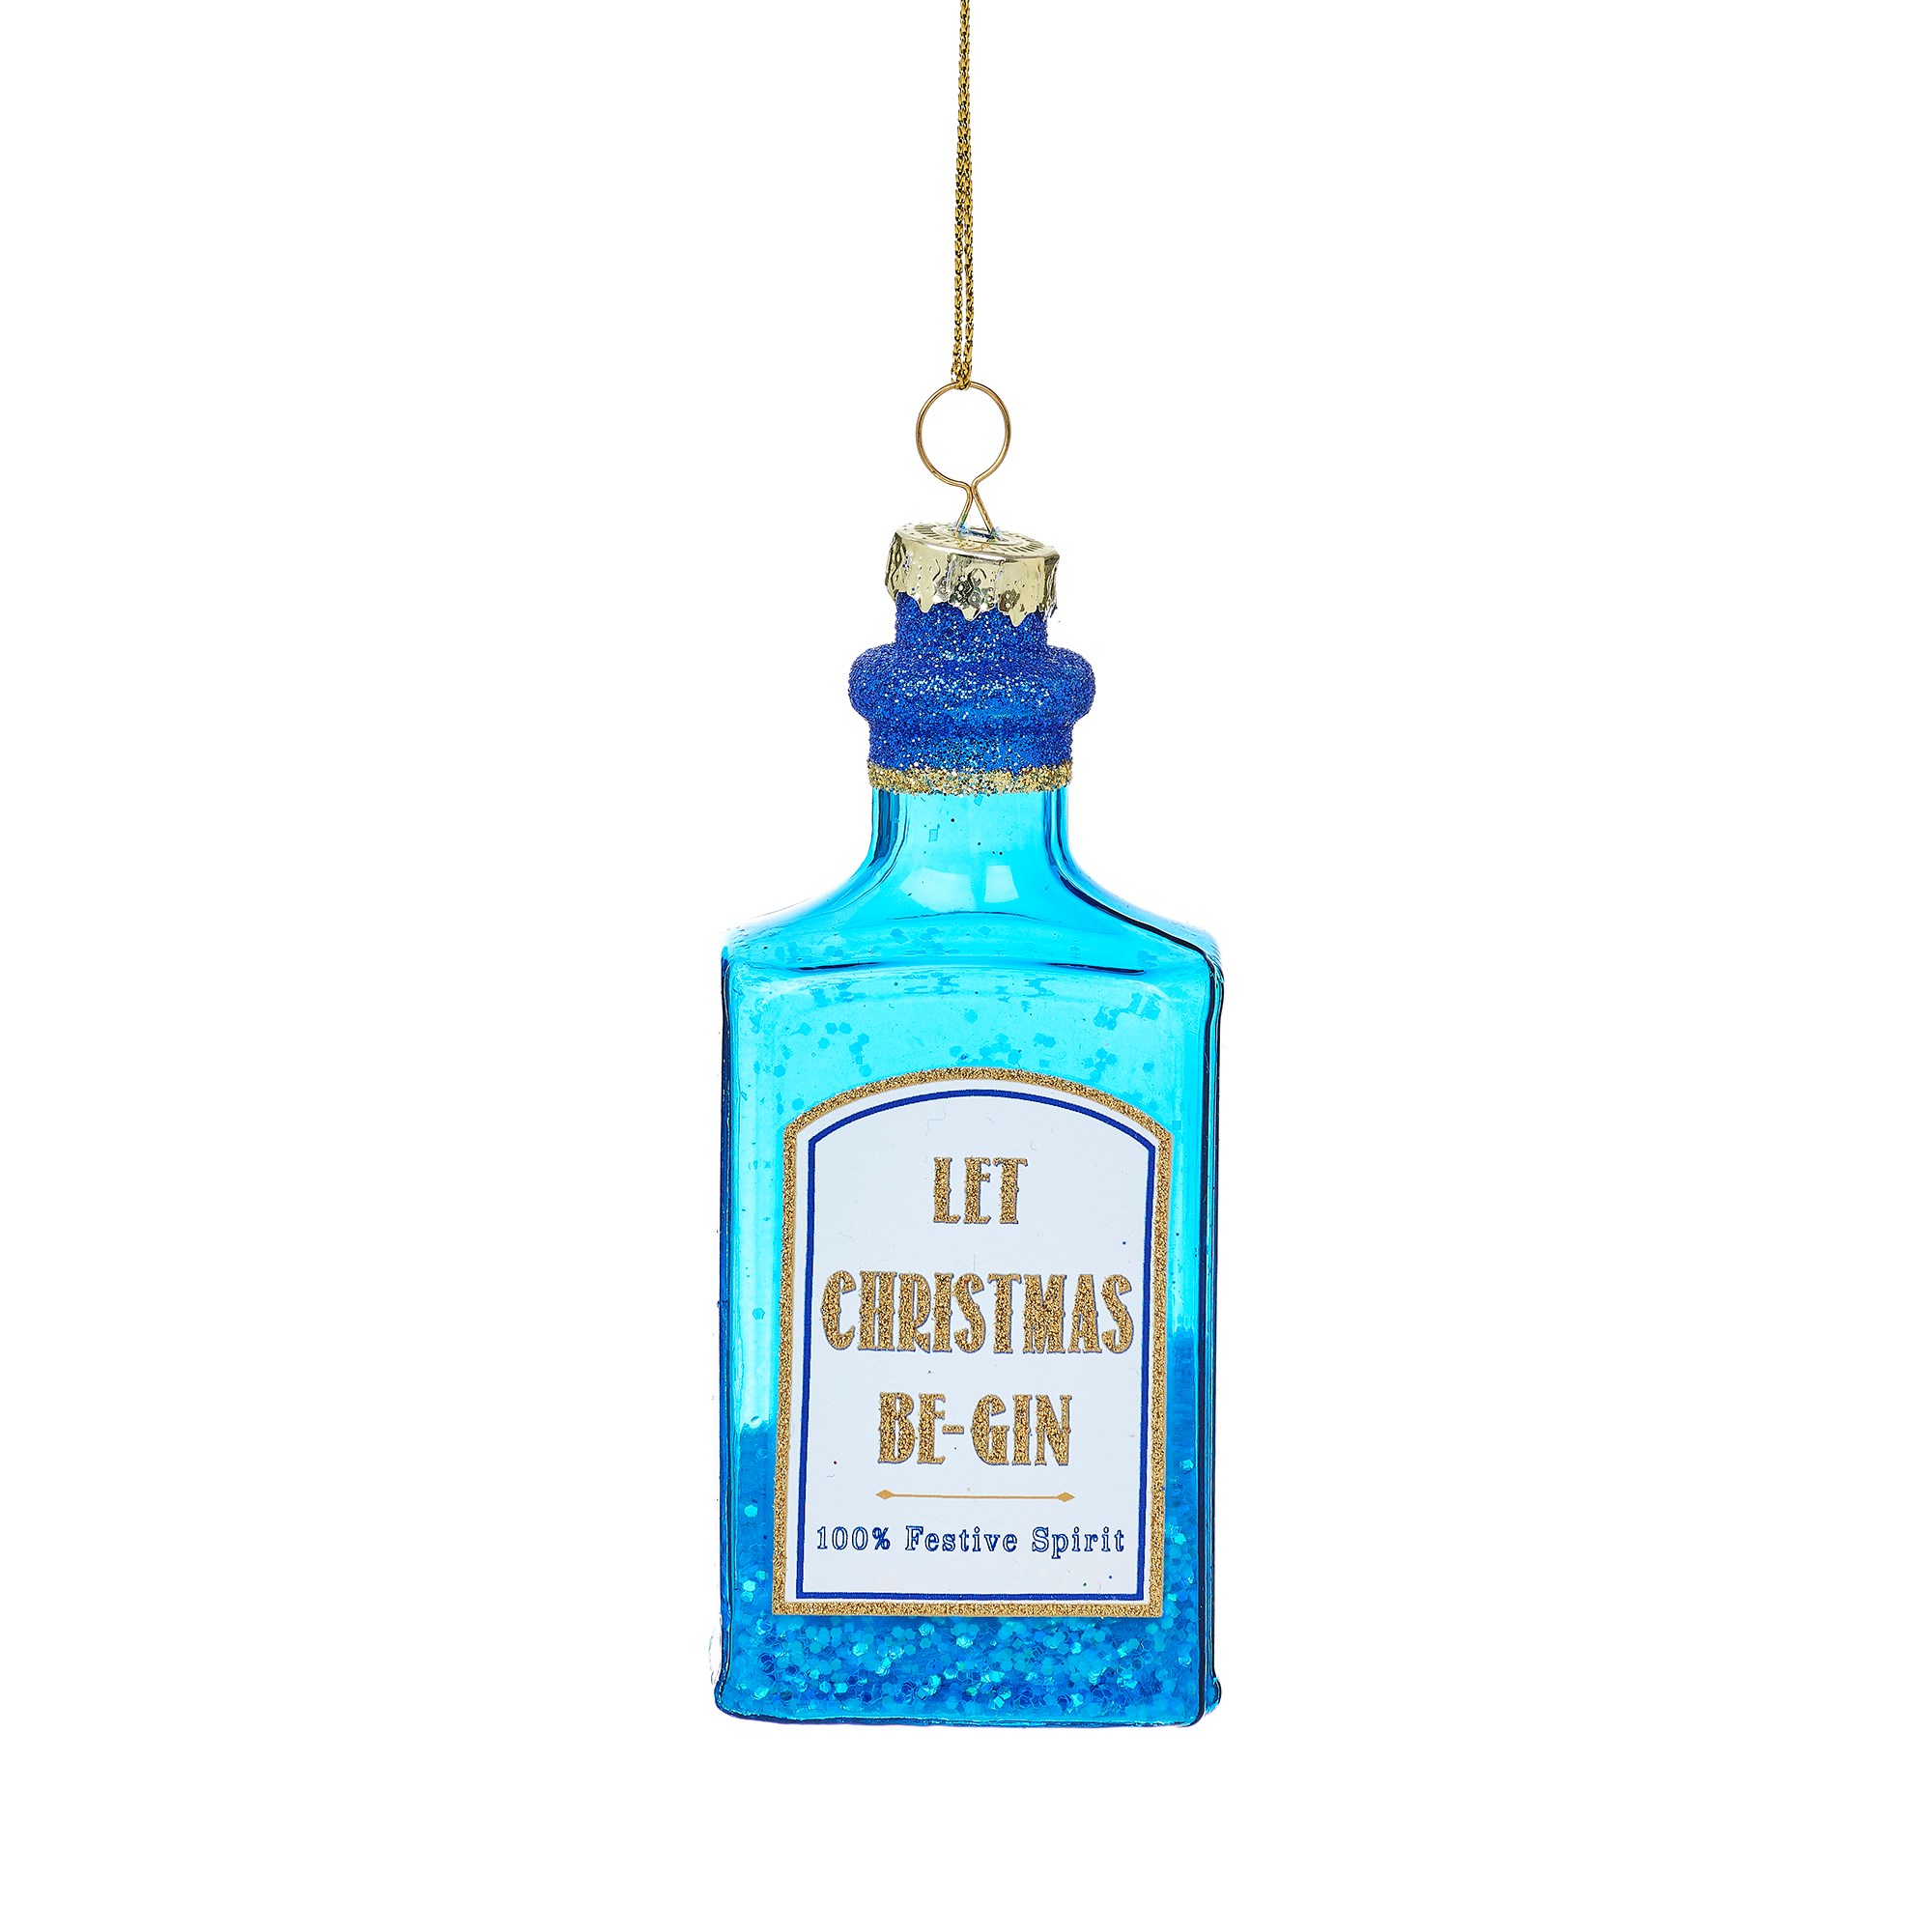 &Quirky Let Christmas Be-Gin Bombay Sapphire Shaped Bauble